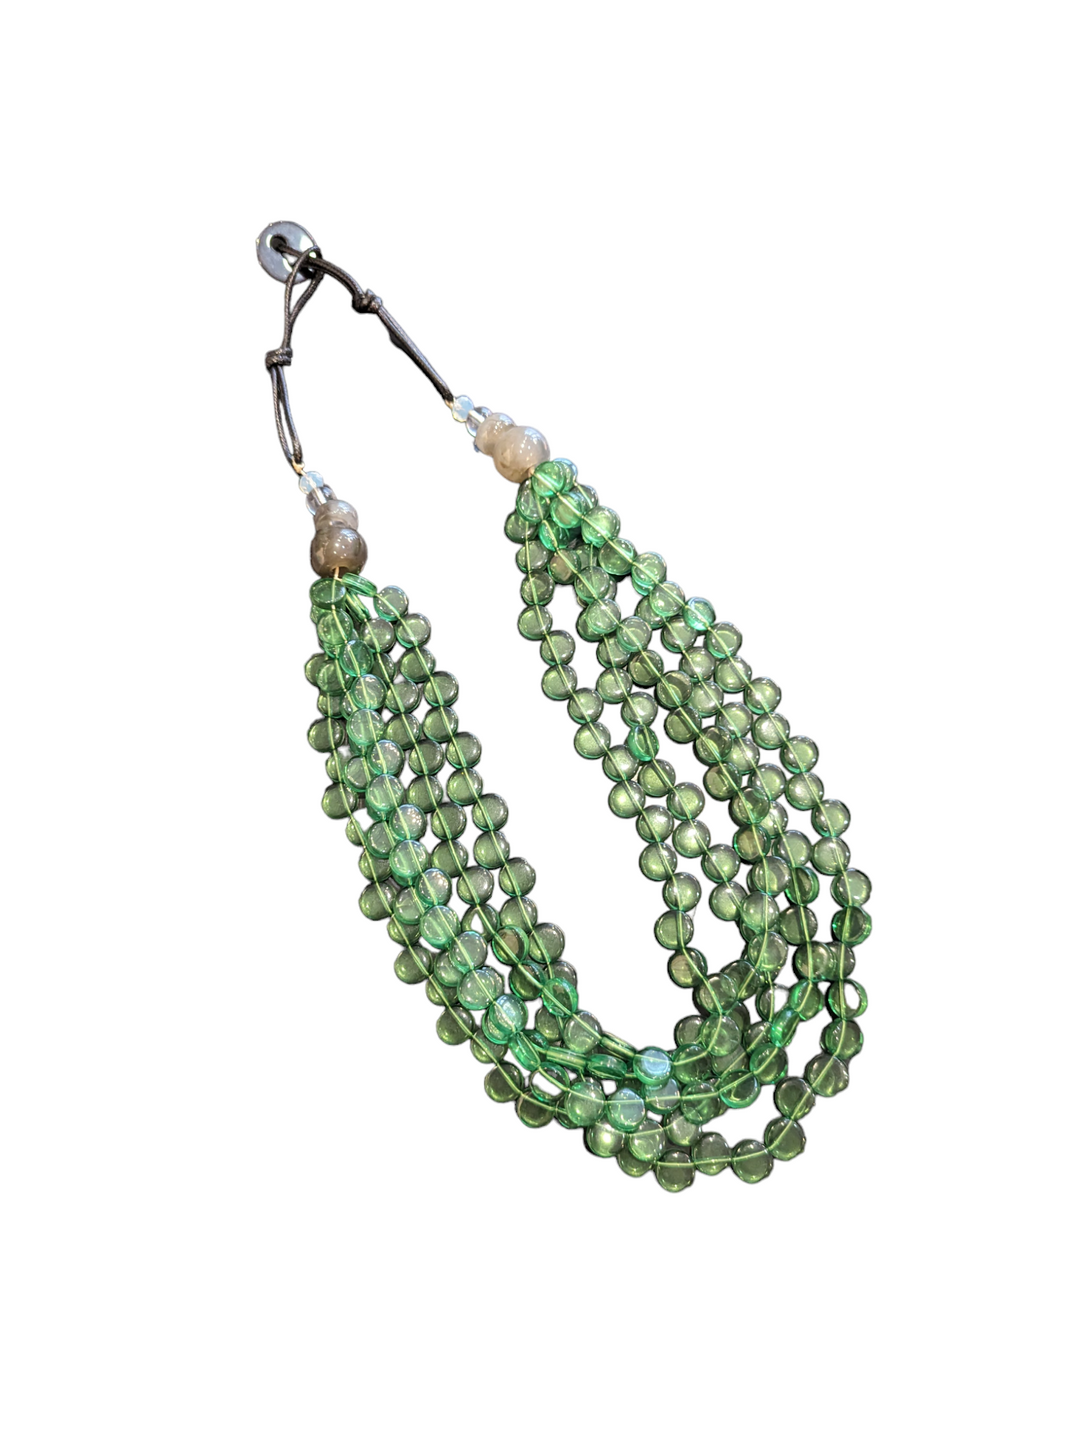 shades of green beads in several strands fall from a central clasp